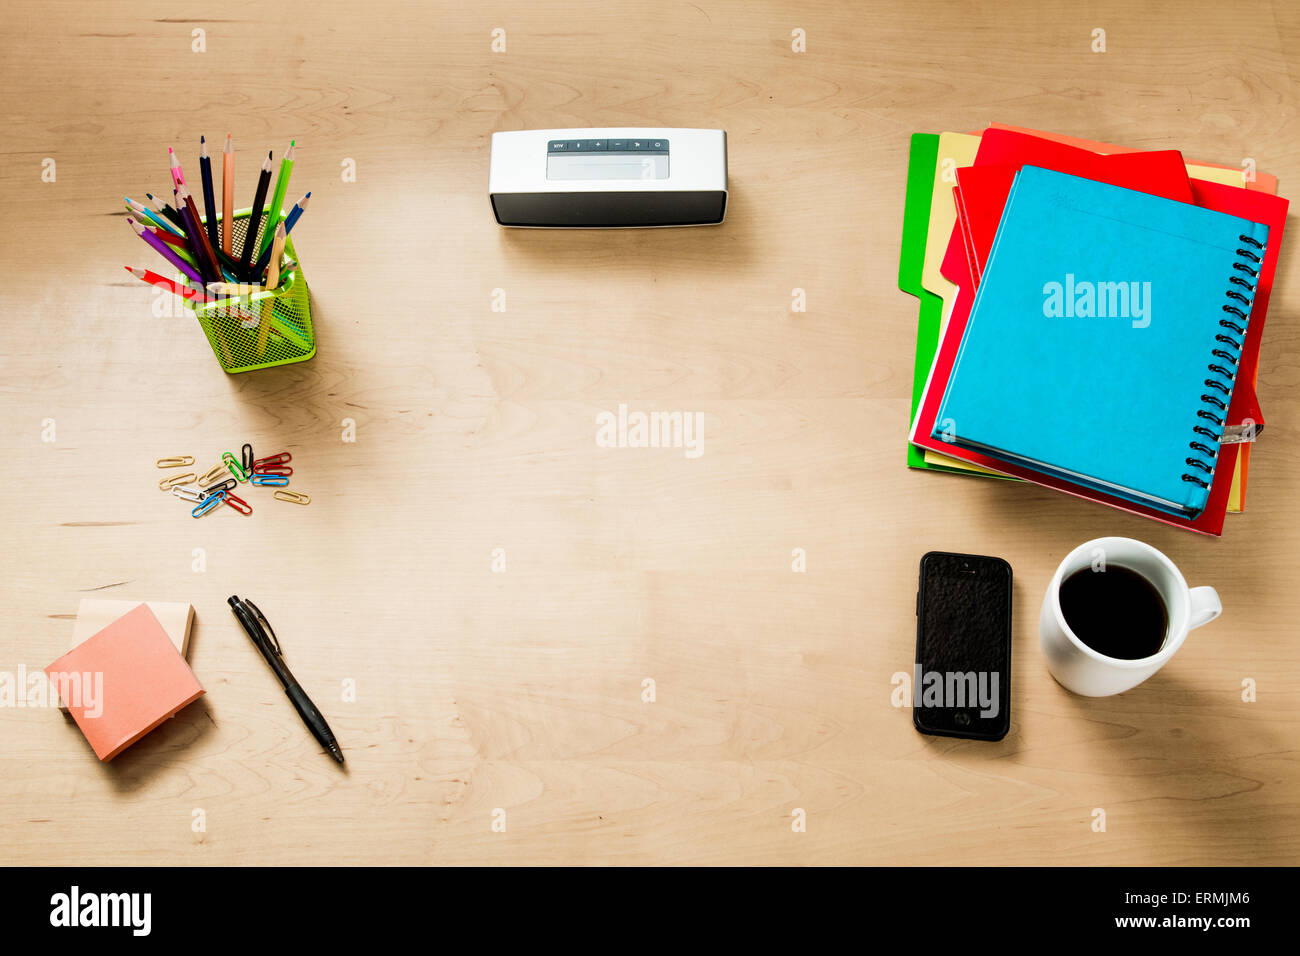 Modern creative workspace made of a flat wooden table, color pencils, a speaker, coffee a smatrphone and other objects Stock Photo